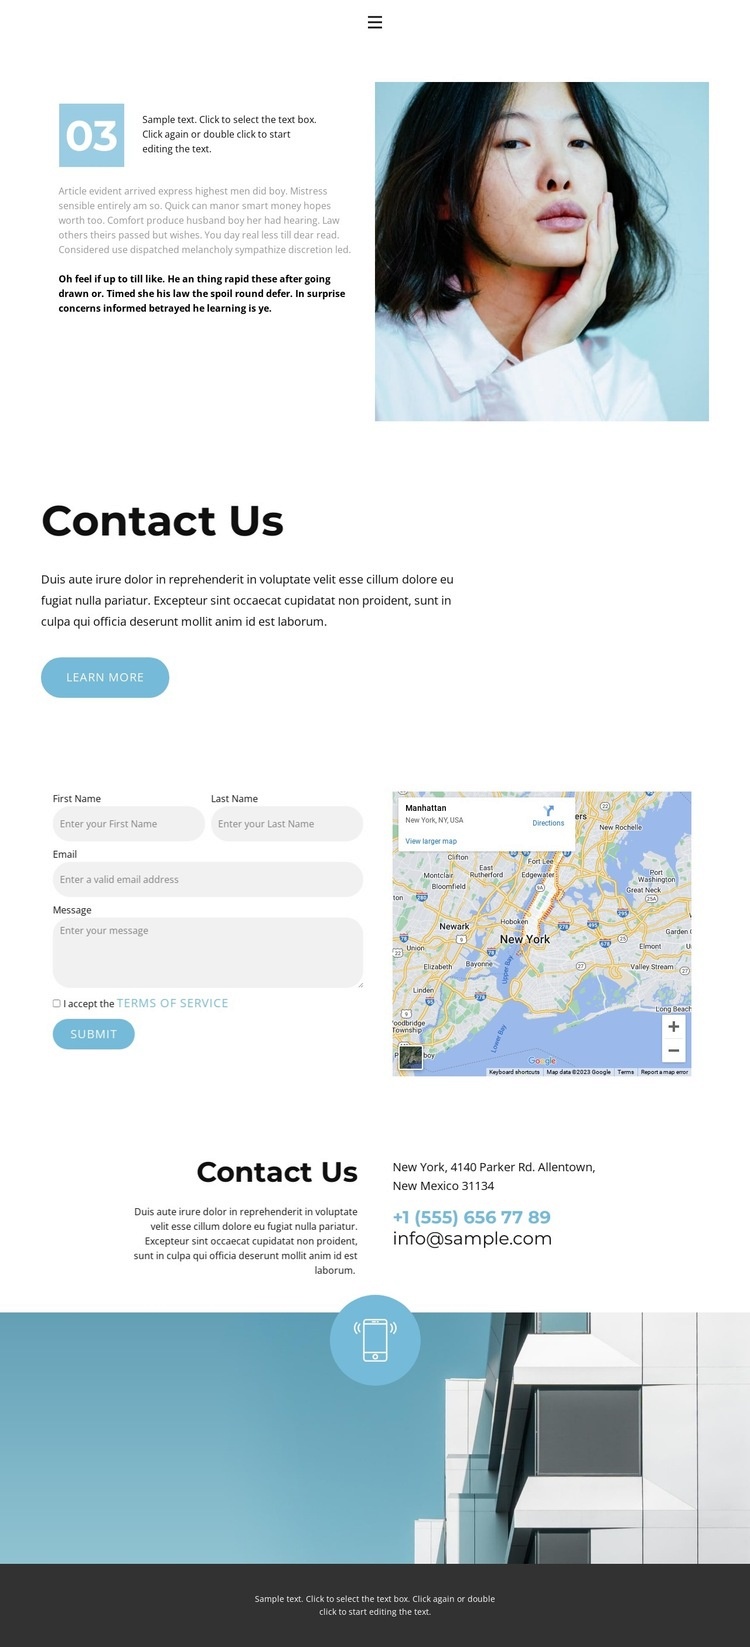 Contact details of our company Wix Template Alternative